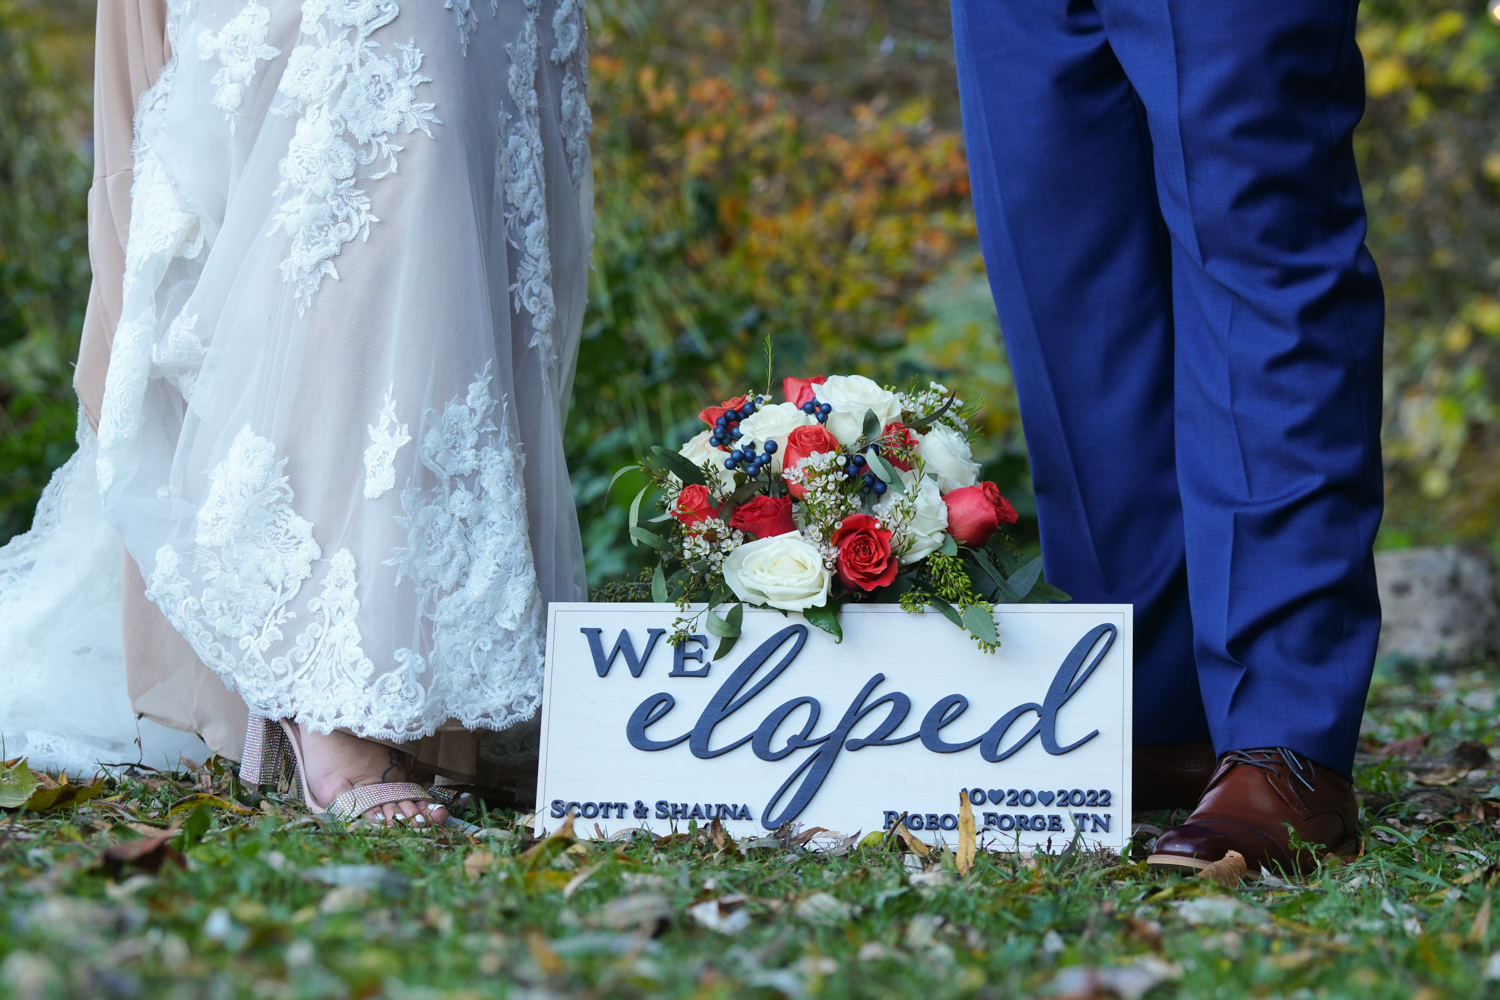 We Eloped sign with bouquet at a bride and groom's feet